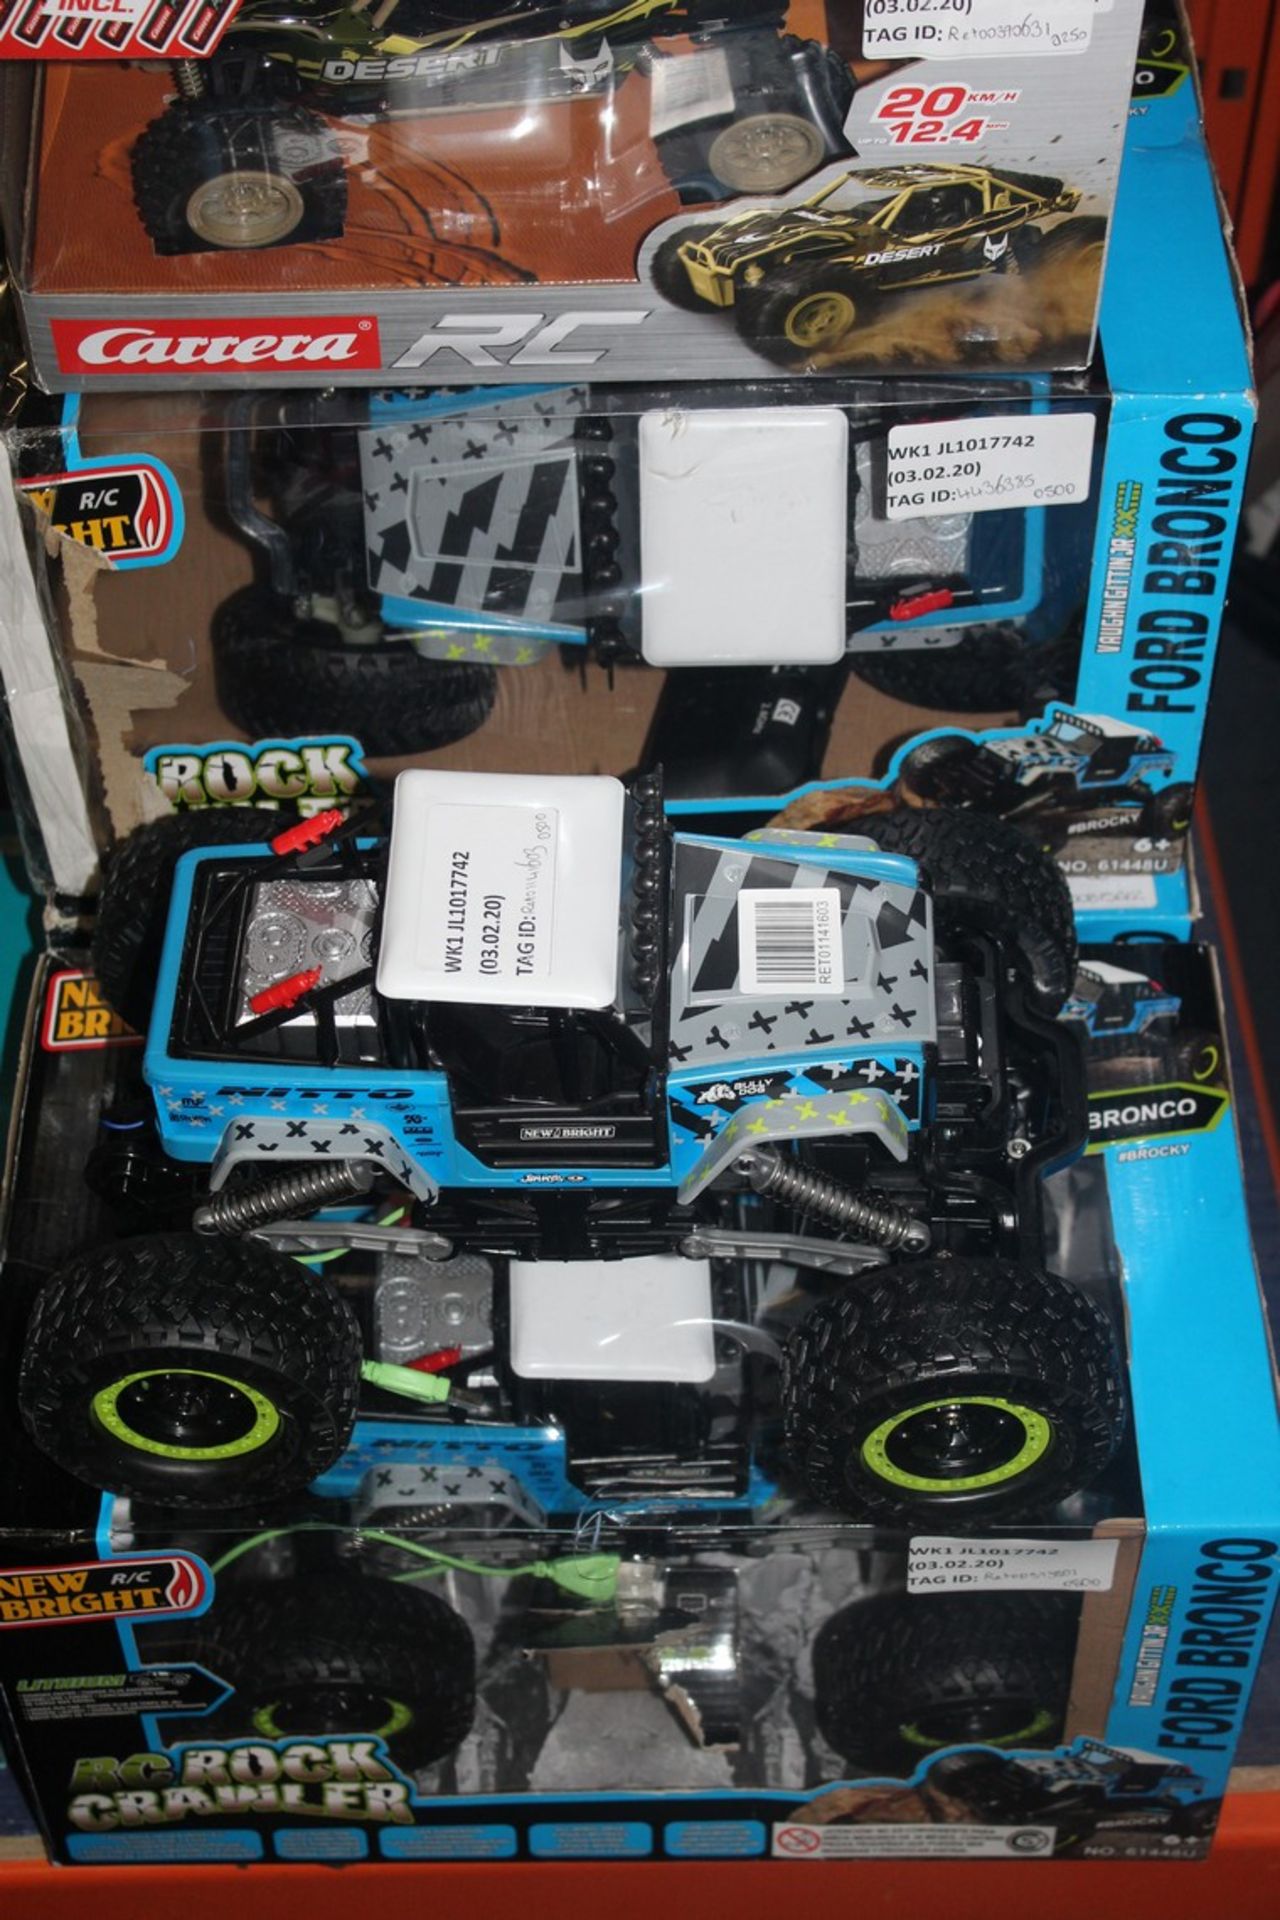 Assorted Boxed and Unboxed New Bright Remote Control Cars and Carrera Desert Buggys RRP £40 - £50